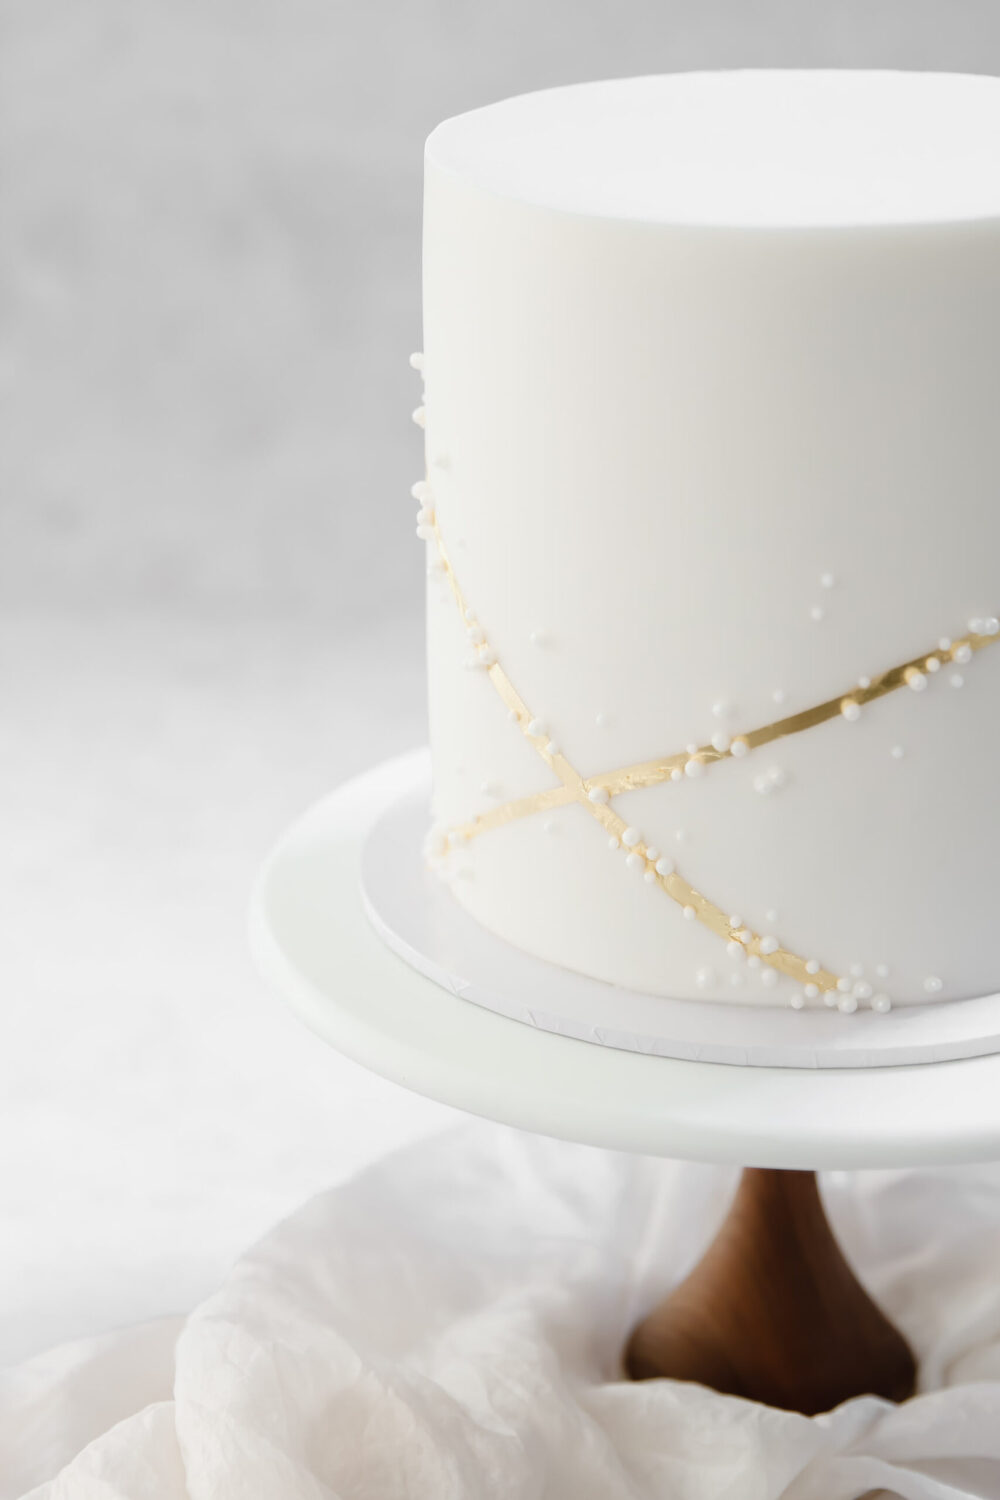 Gold and Pearl Wedding Cake Cove Cake Design